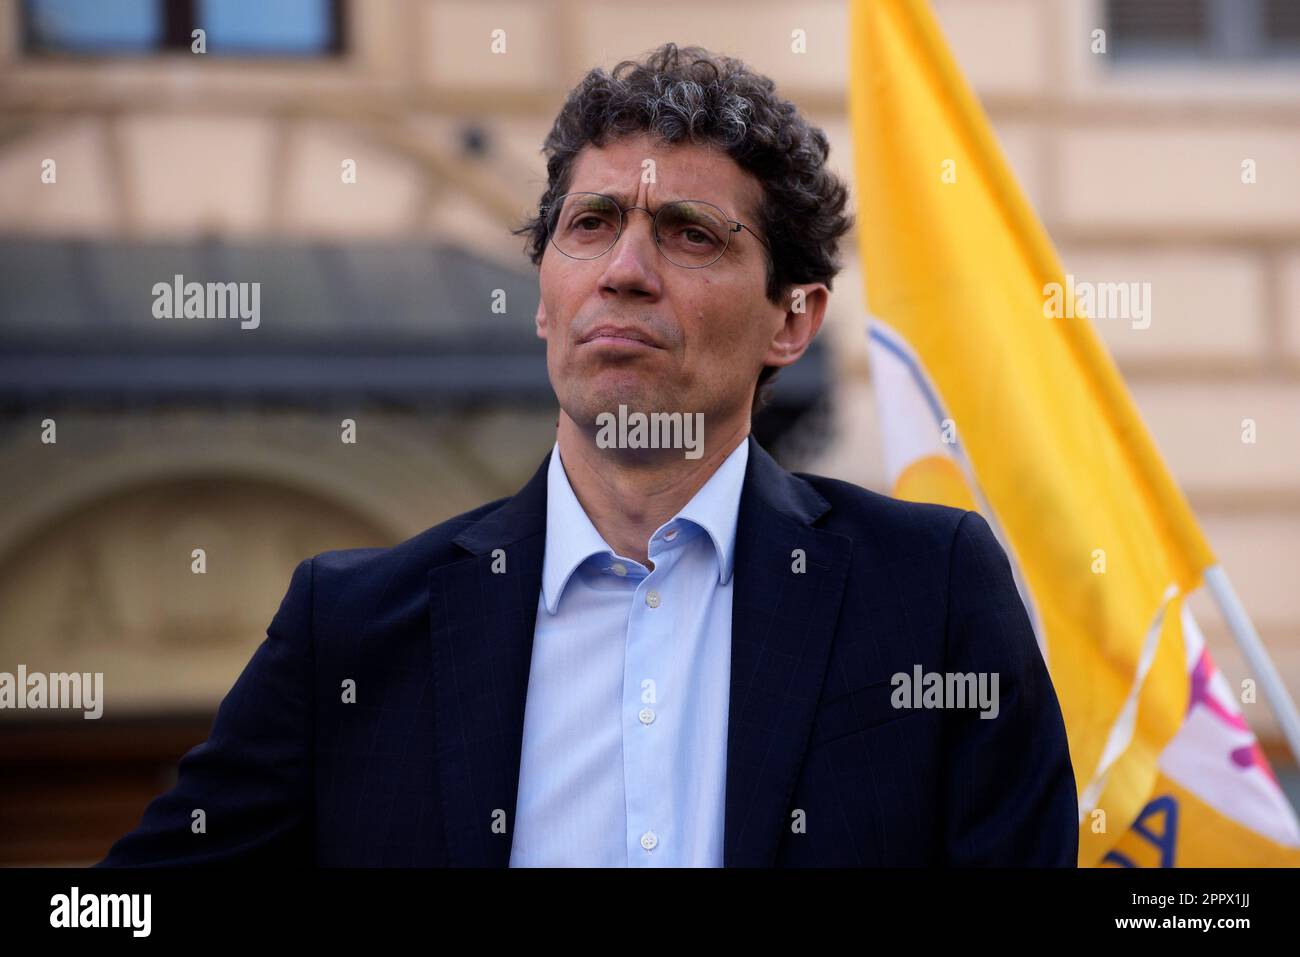 Rome, Italy. 25th Apr, 2023. Riccardo Magi attends celebrations of Italy's liberation from Nazi-fascism and full support for Ukrainian resistance against dictator Putin's fascism in Rome, Italy. Credit: Vincenzo Nuzzolese/Alamy Live News Stock Photo